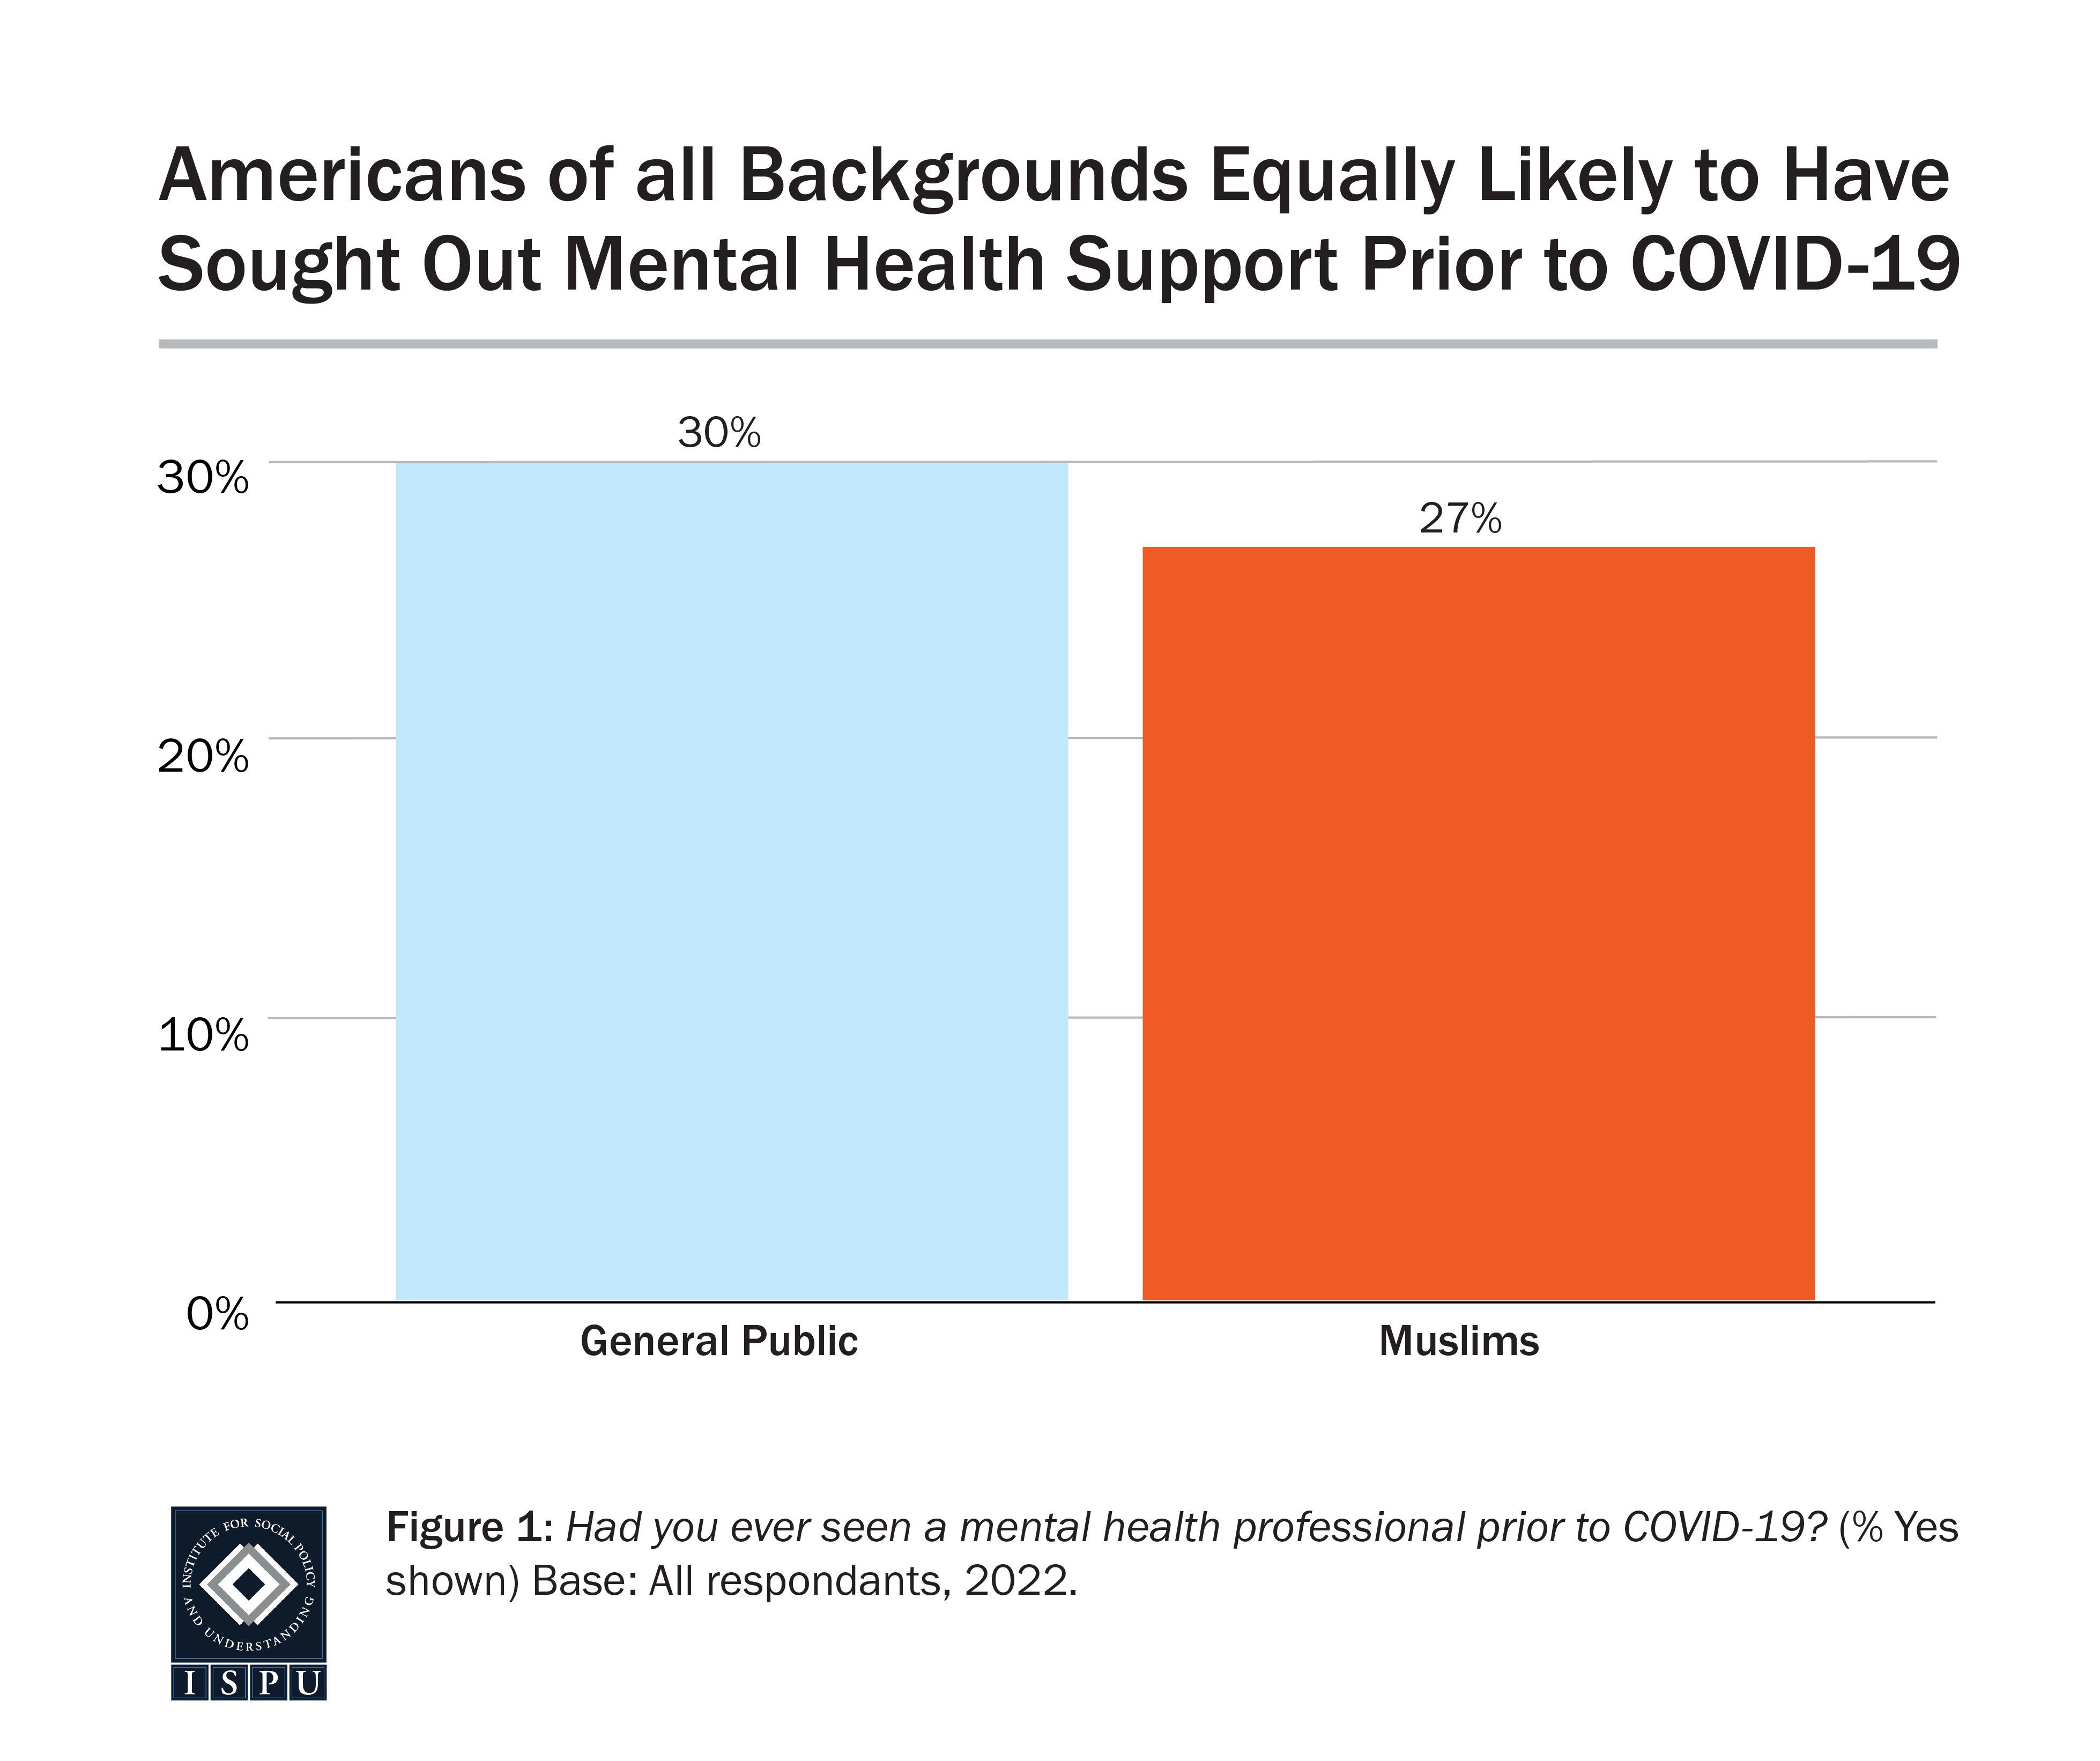 Graph displaying: bar chart showing American Muslims and general public equally likely to seek mental health support prior to COVID-19.